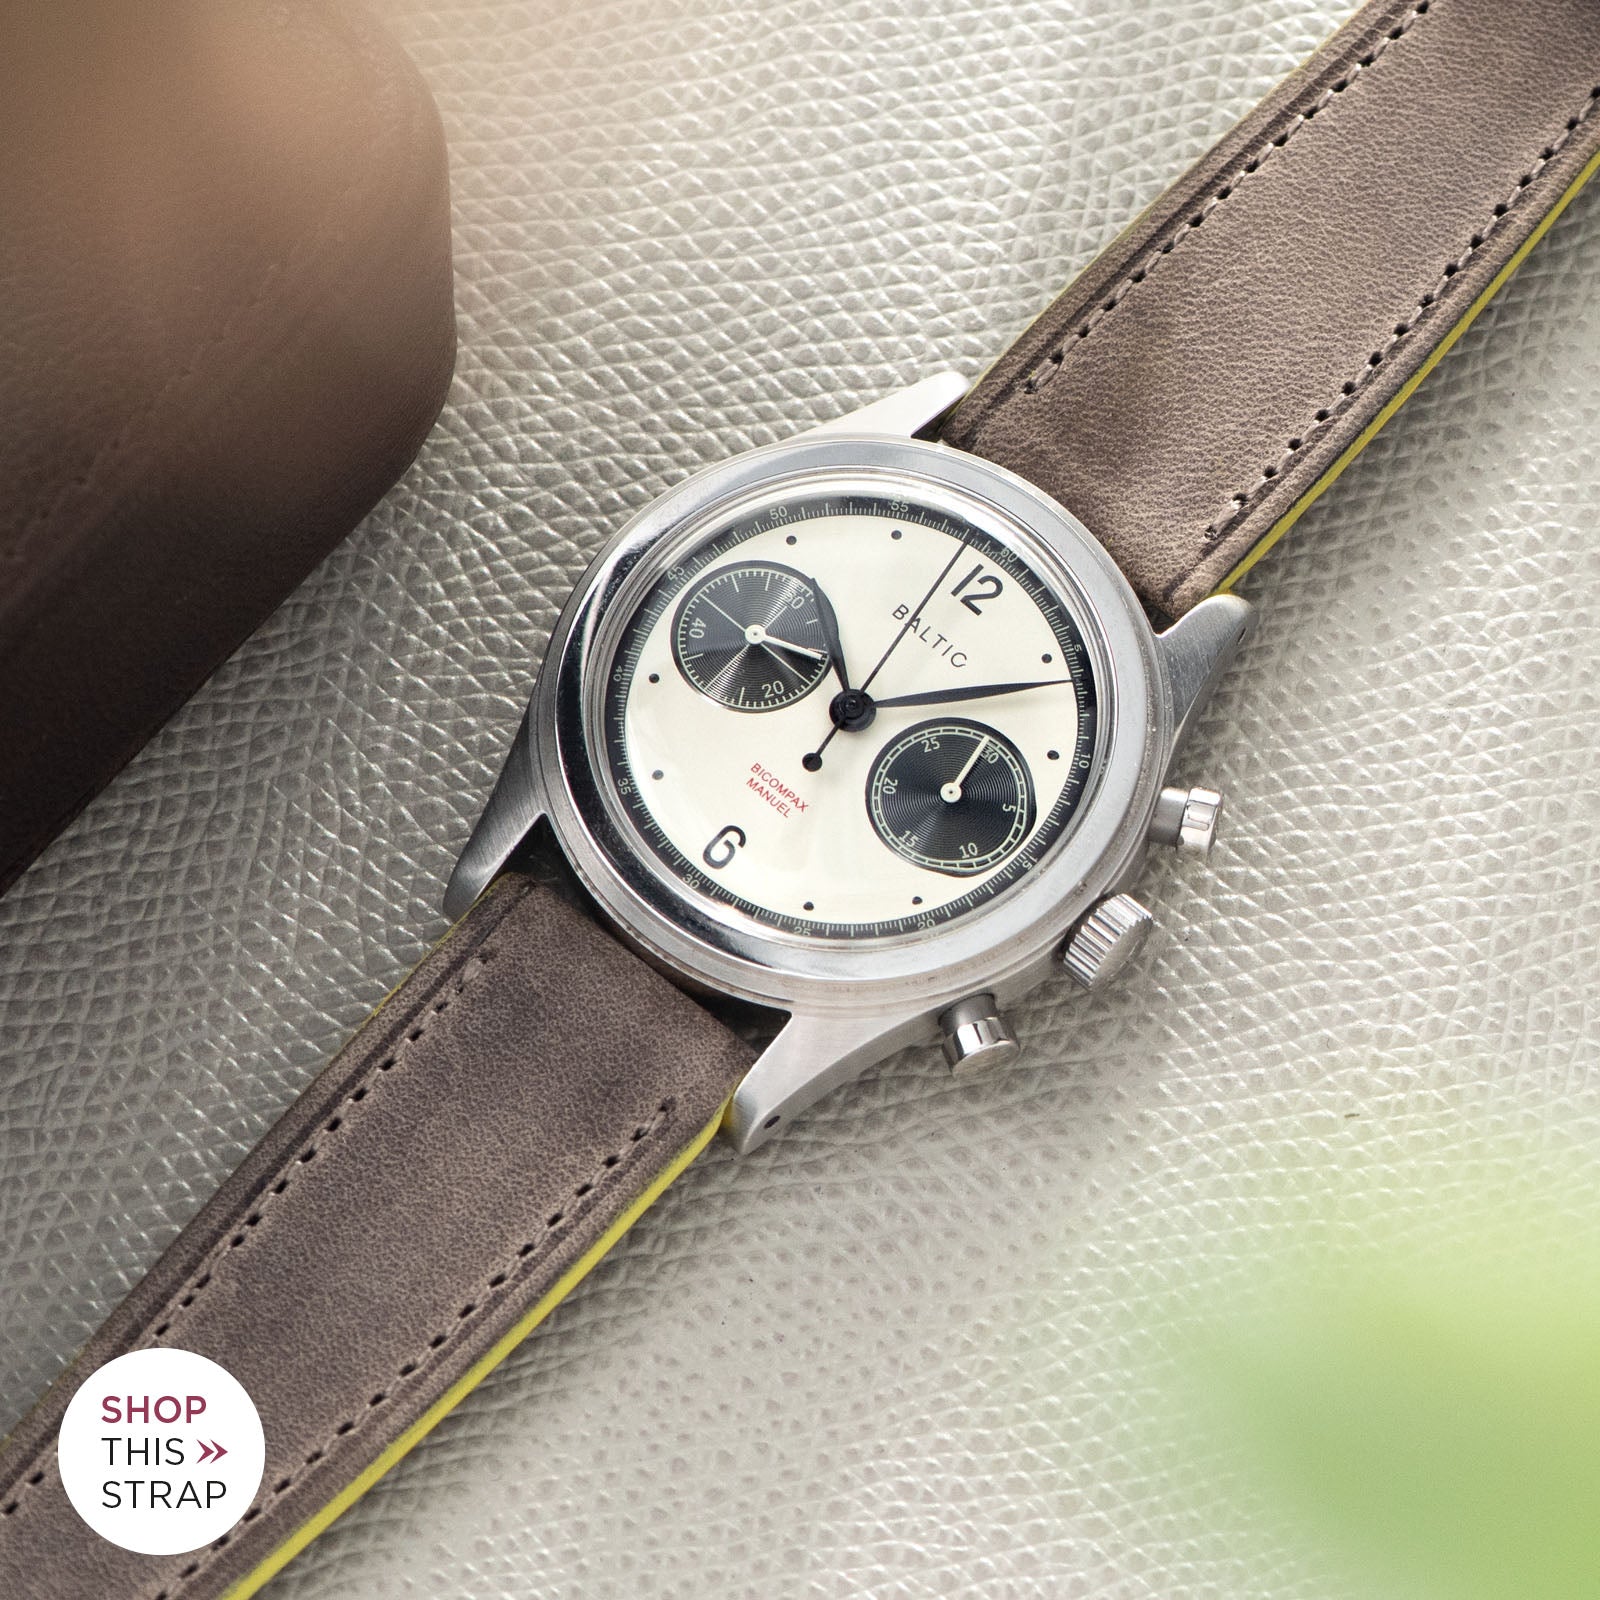 Bulang and Sons_Strap Guide_The Baltic-Chronograph-Panda-Limited-Edition_Monte Carlo Grey Leather Watch Strap